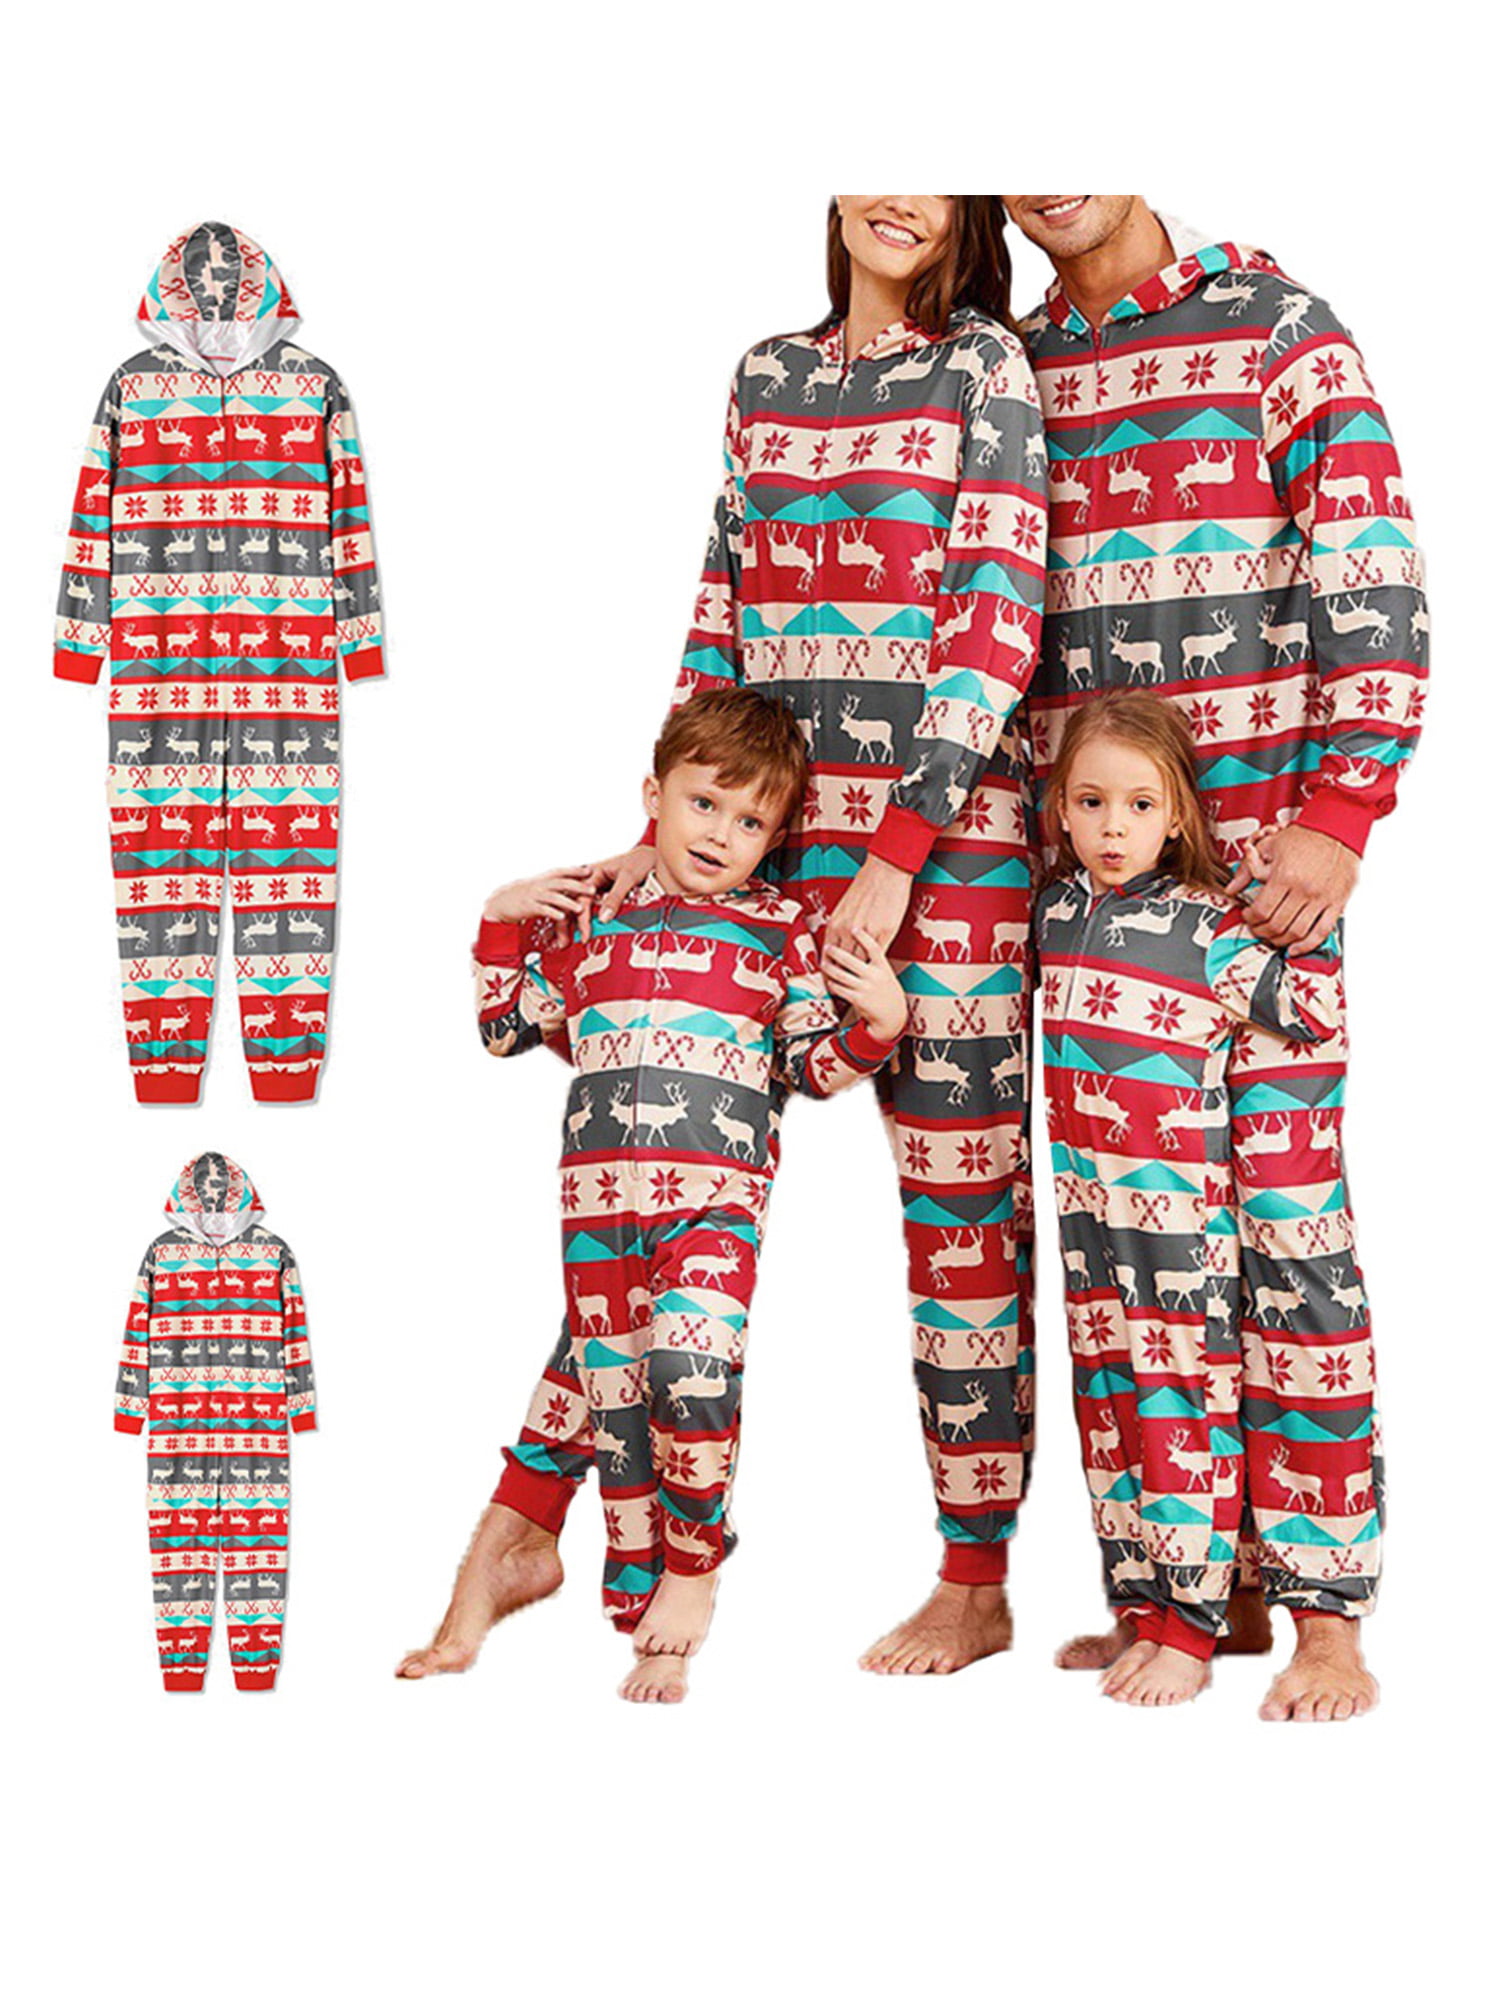 Infant Matching Family Christmas Pajamas Sets Kids Warm Hooded Flannel Cute Print Pattern Sleepwear Onesies for Adult Pet